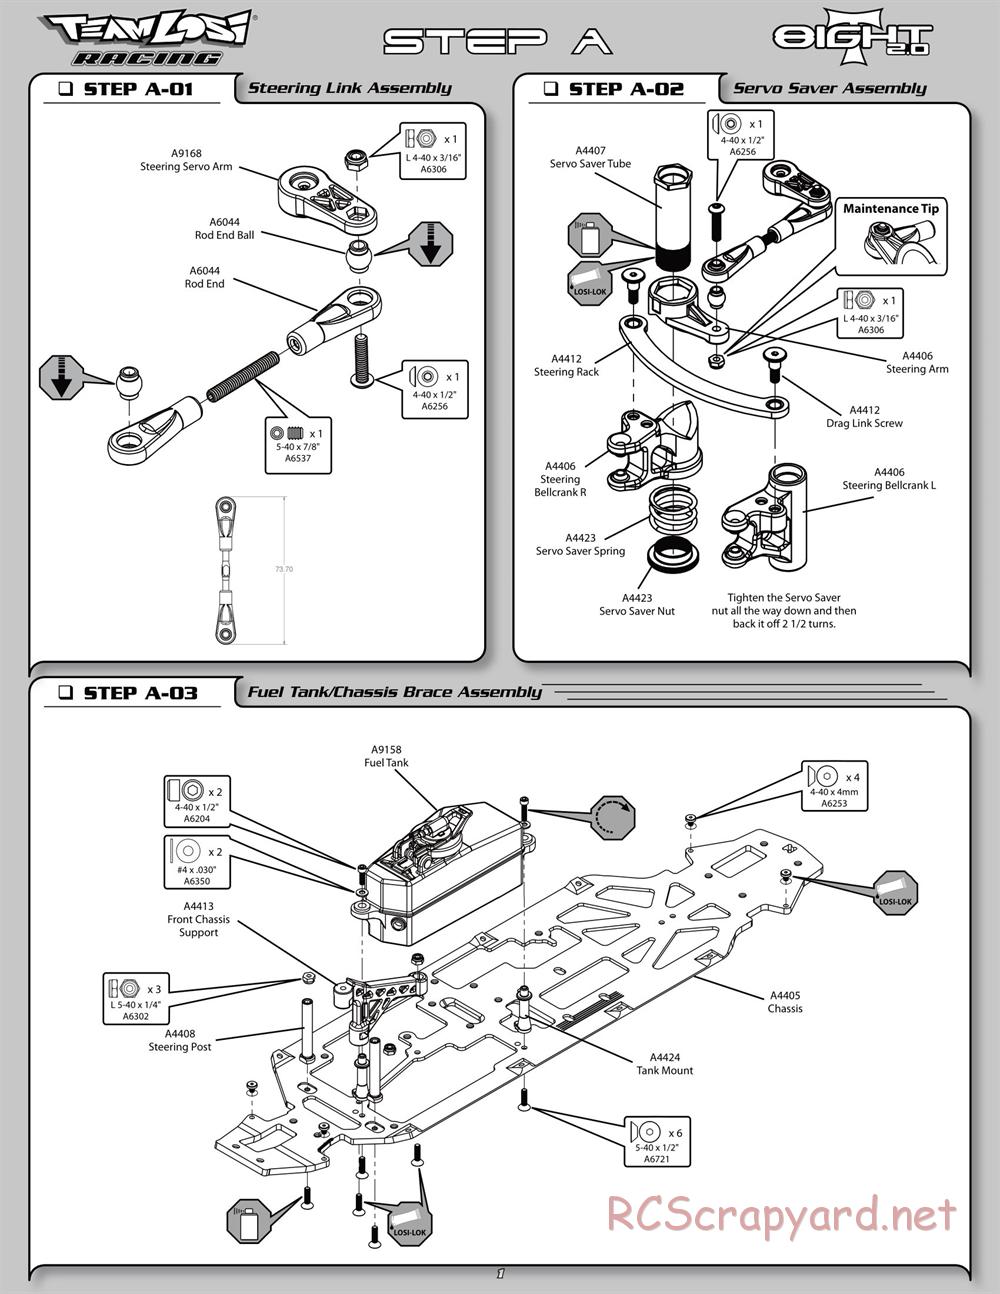 Team Losi - 8ight-T 2.0 Race Roller - Manual - Page 6